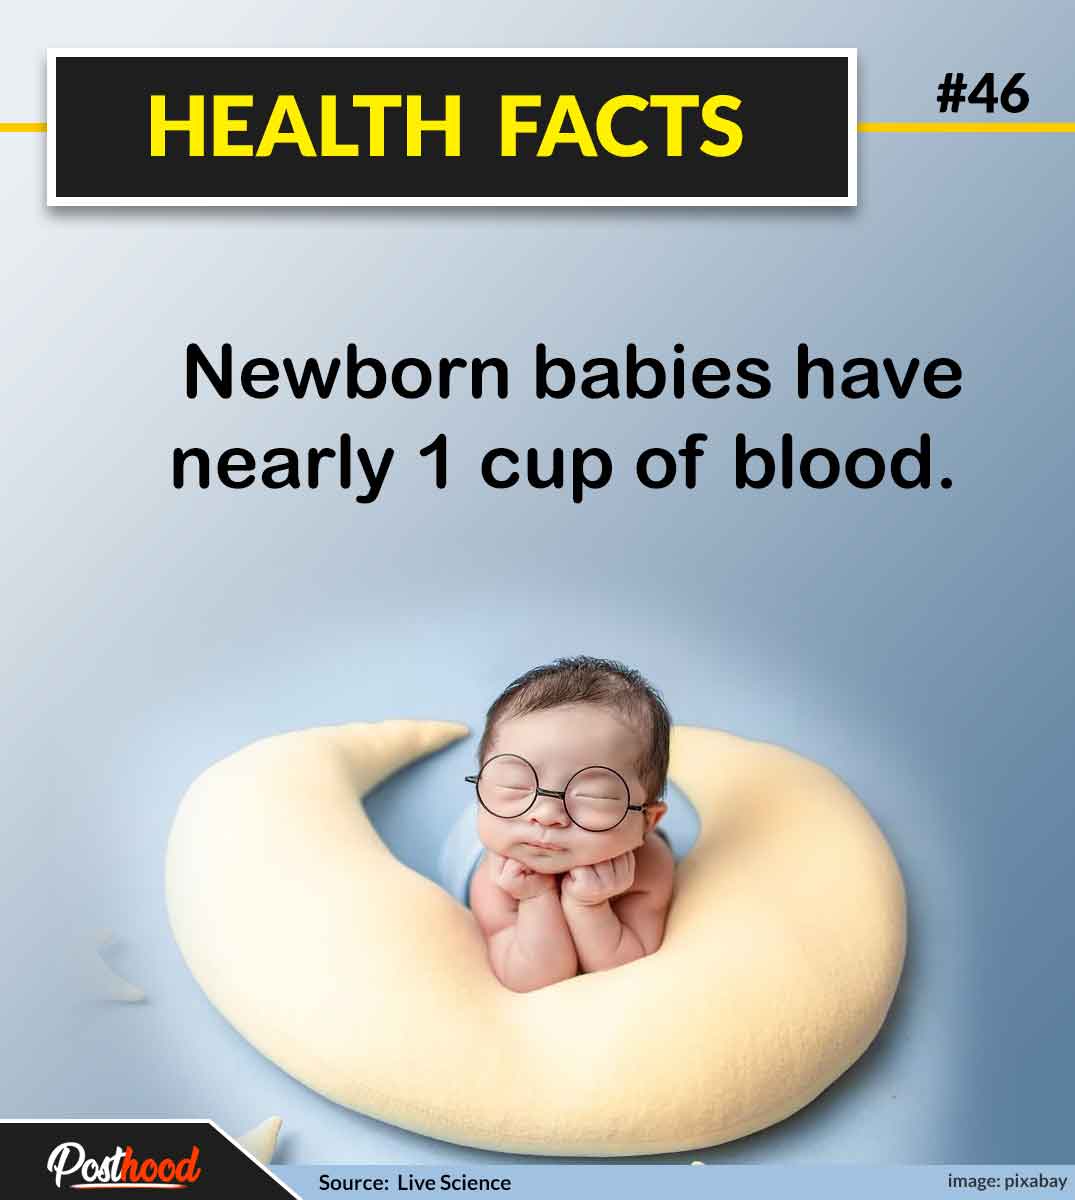 Surprising facts but true that newborn babies barely have any blood. Know more interesting health facts about human body.